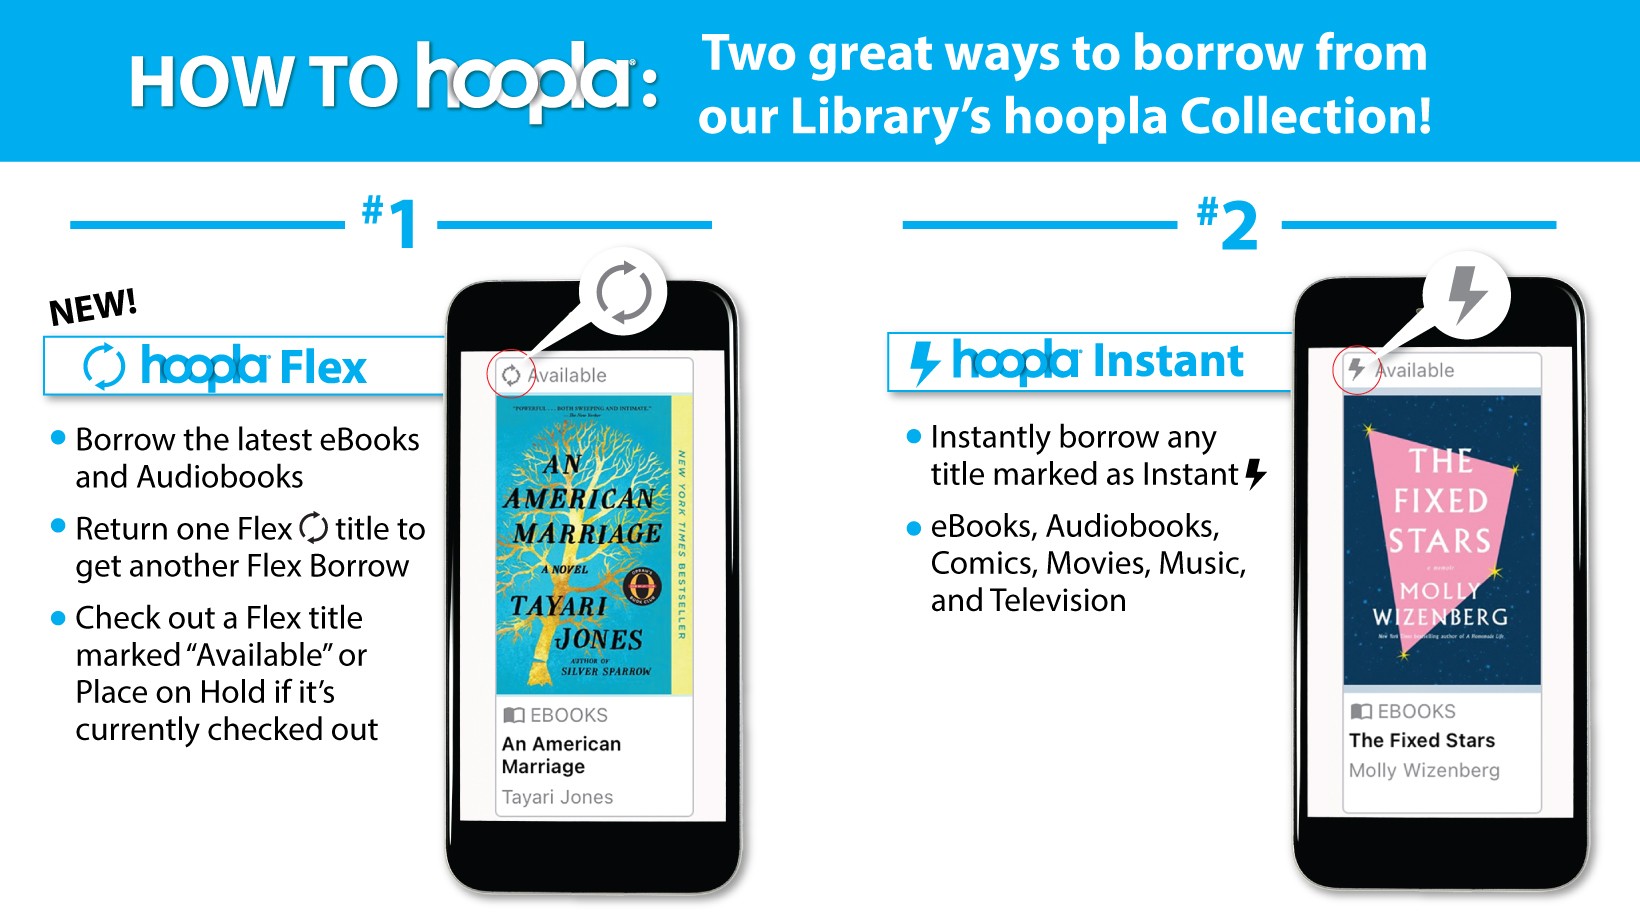 How to hoopla: two great ways to borrow from our Library's hoopla collection! hoopla Flex- Use up to 3 borrows at time. Return one Flex title to get another Flex borrow. Check out a Flex title marked "Available" or Place on Hold if it's currently checked out. Flex titles are available on select eBooks and audiobooks only. hoopla instant - use up to 10 borrows per month on any title marked as instant. 